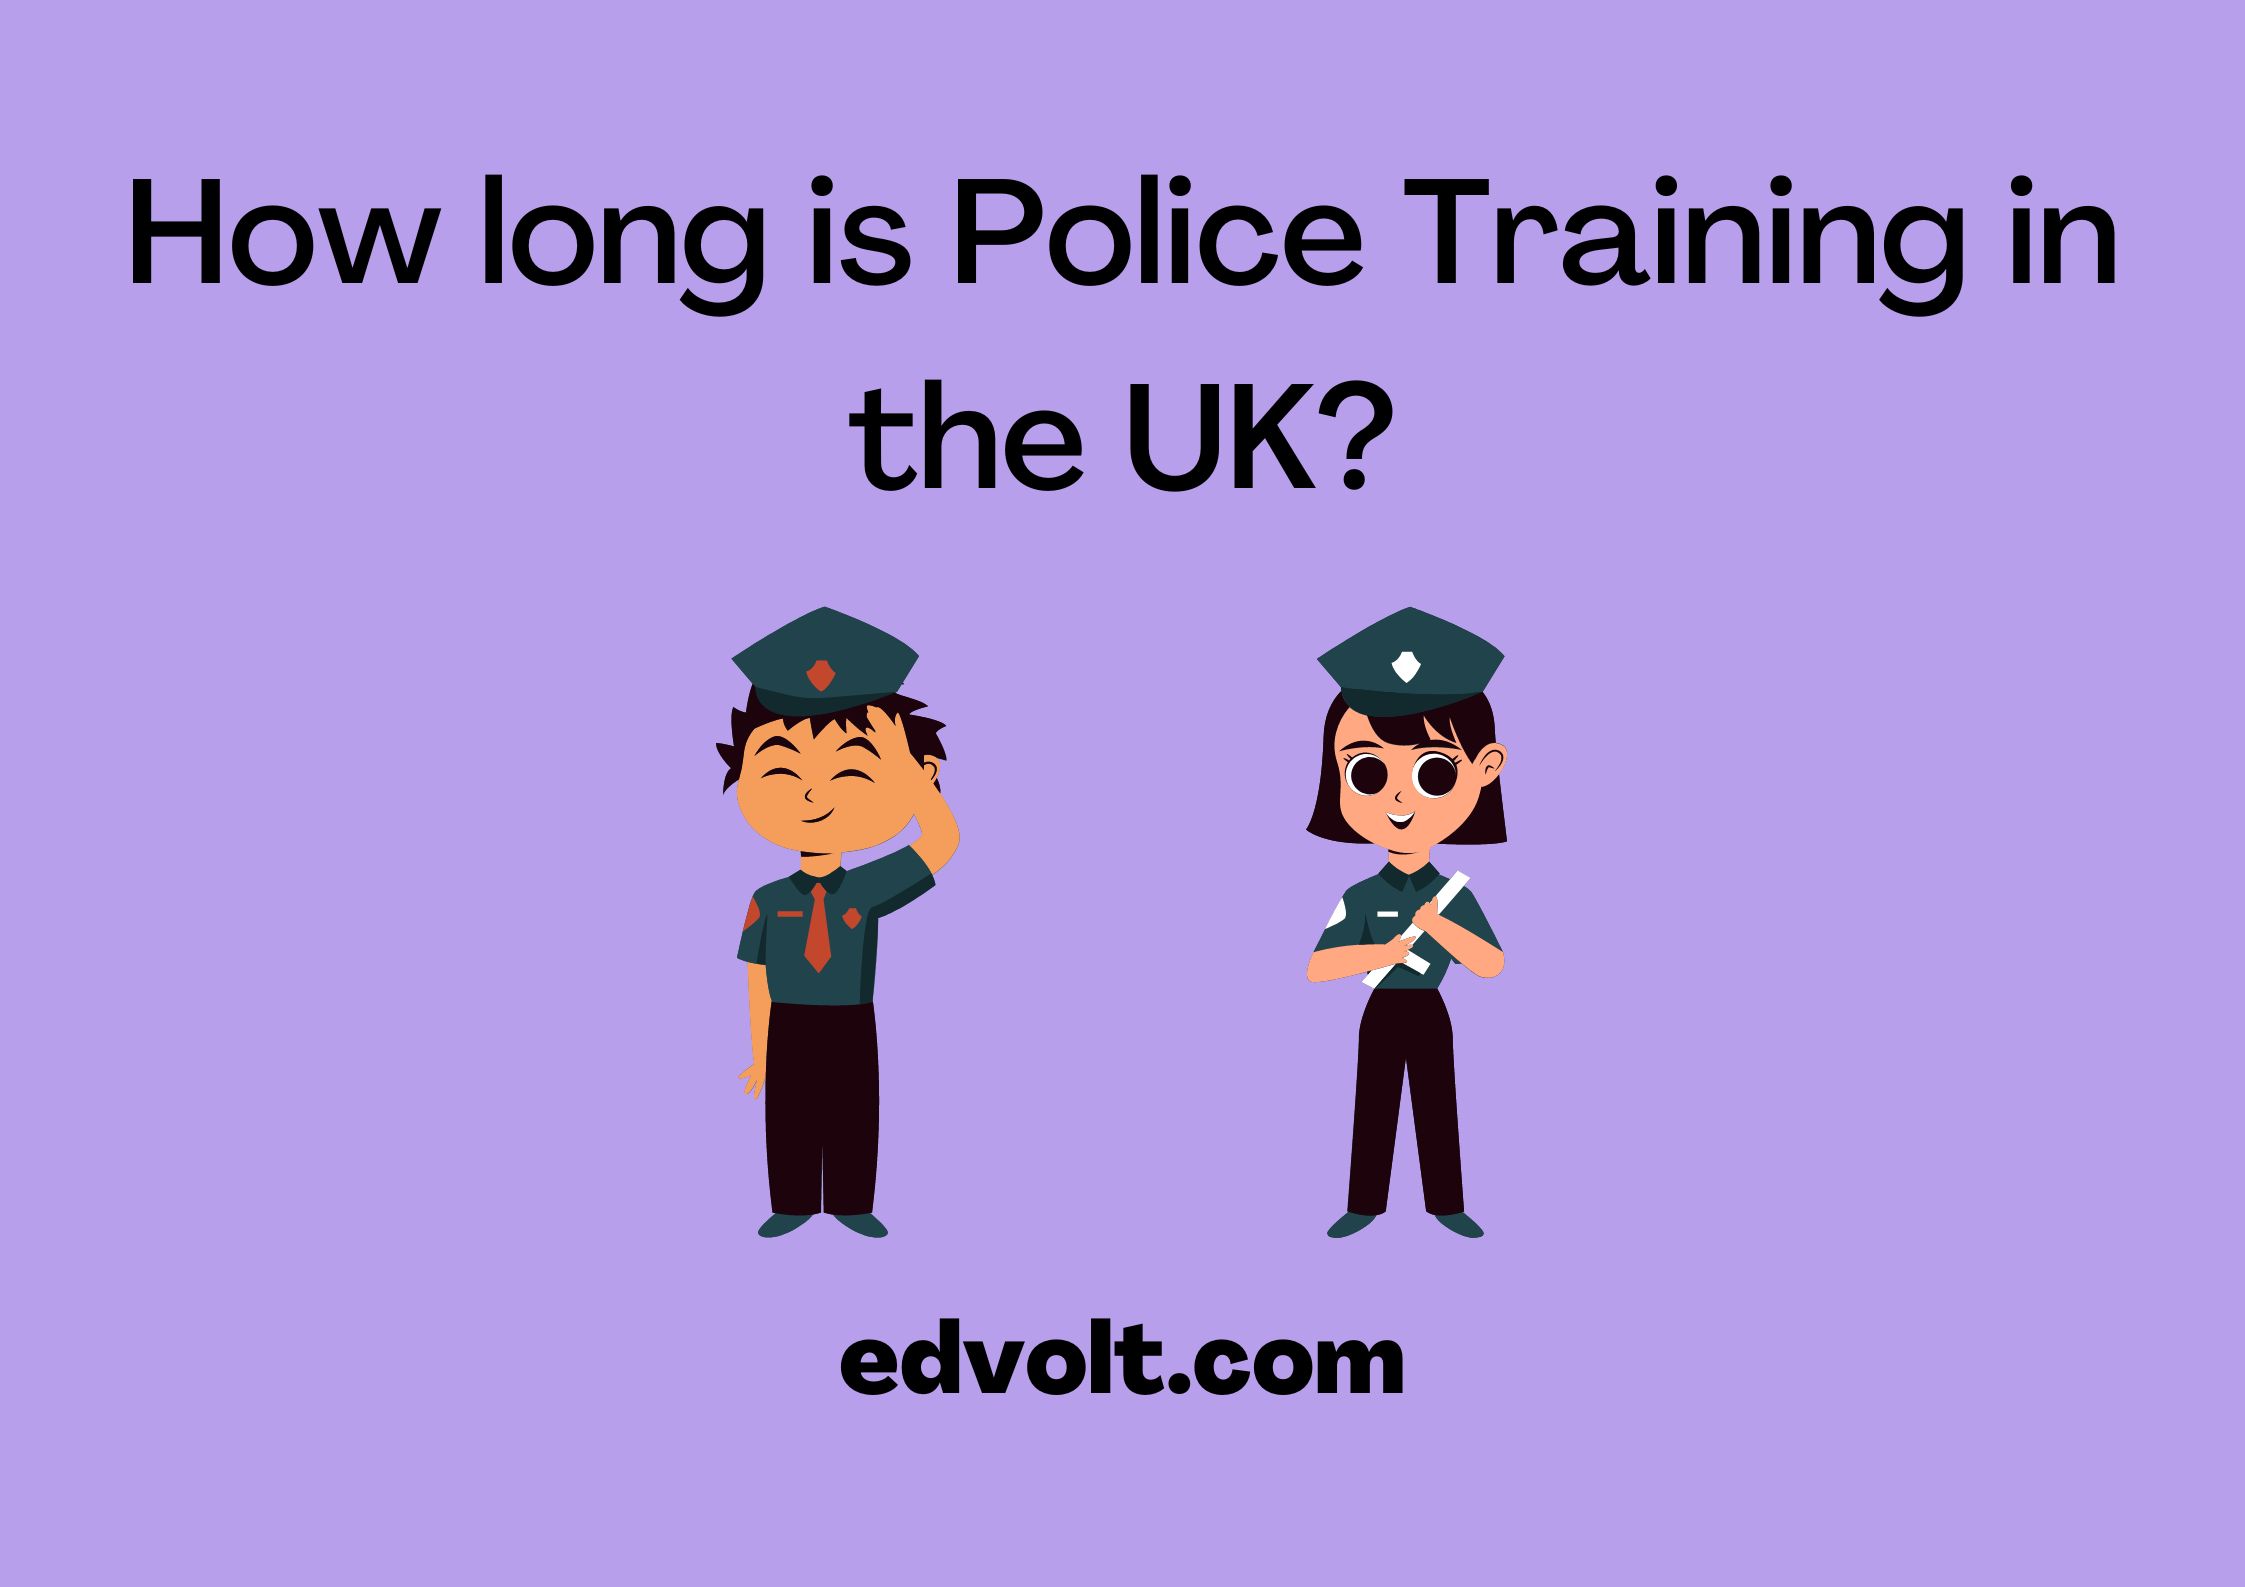 How long is Police Training in the UK?